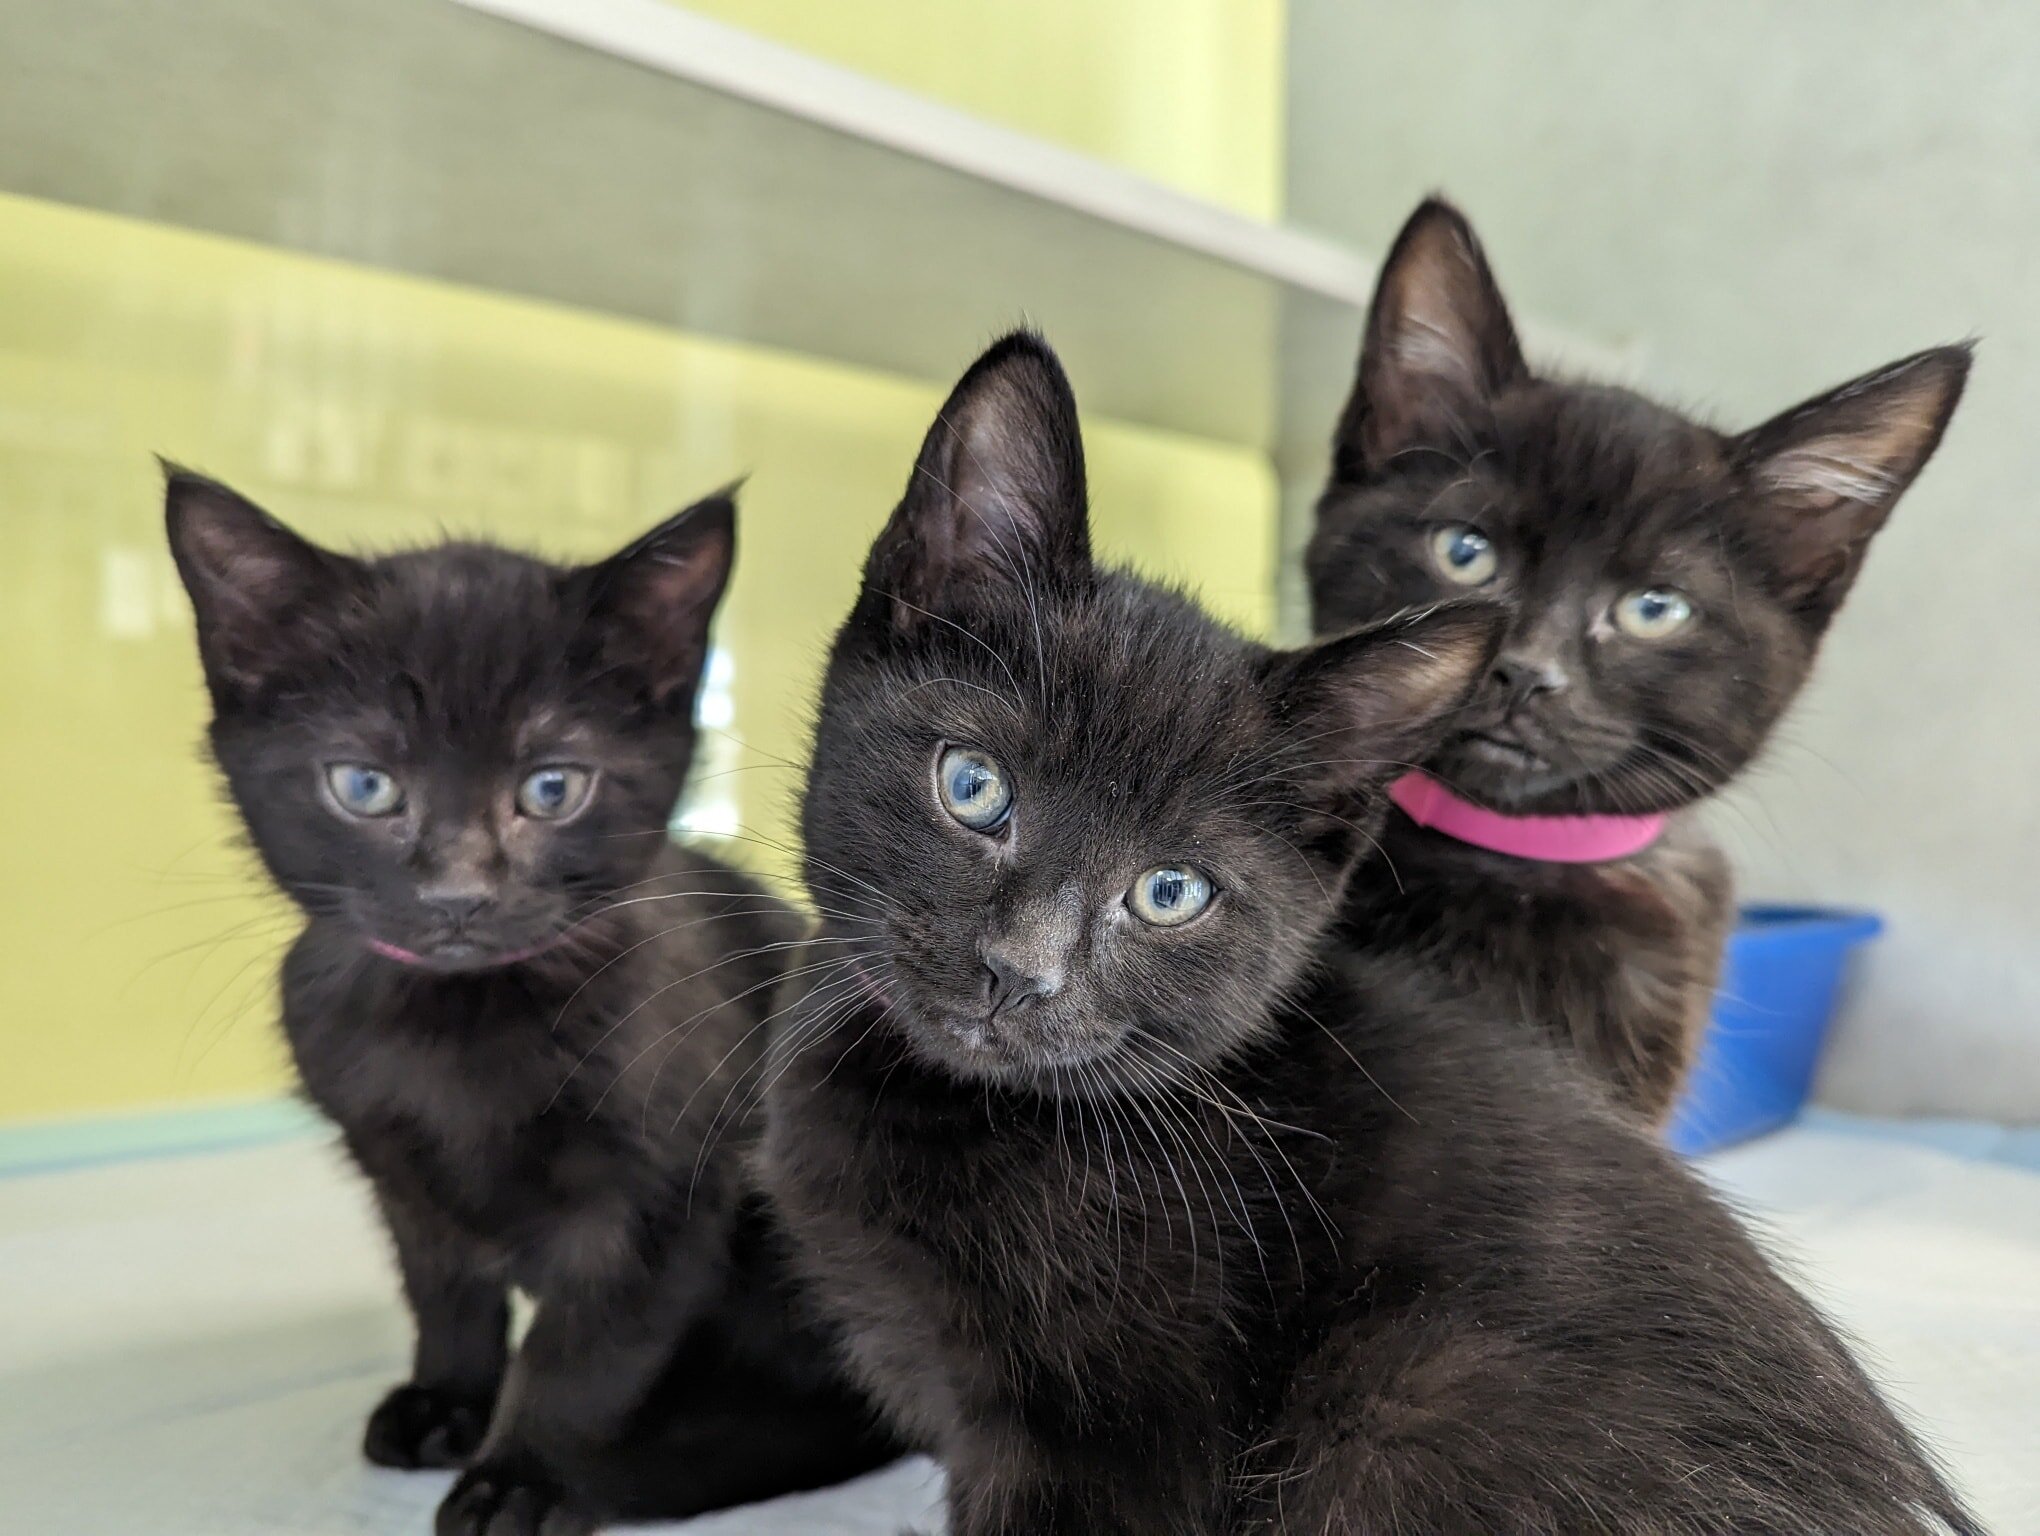 Kittens will soon be all over this city. It's up to us and our community to help prevent such an intense kitten season this year through TNR.

Street Cat HUB's mission is to provide the city of Albuquerque and Bernalillo County with the spay and neut